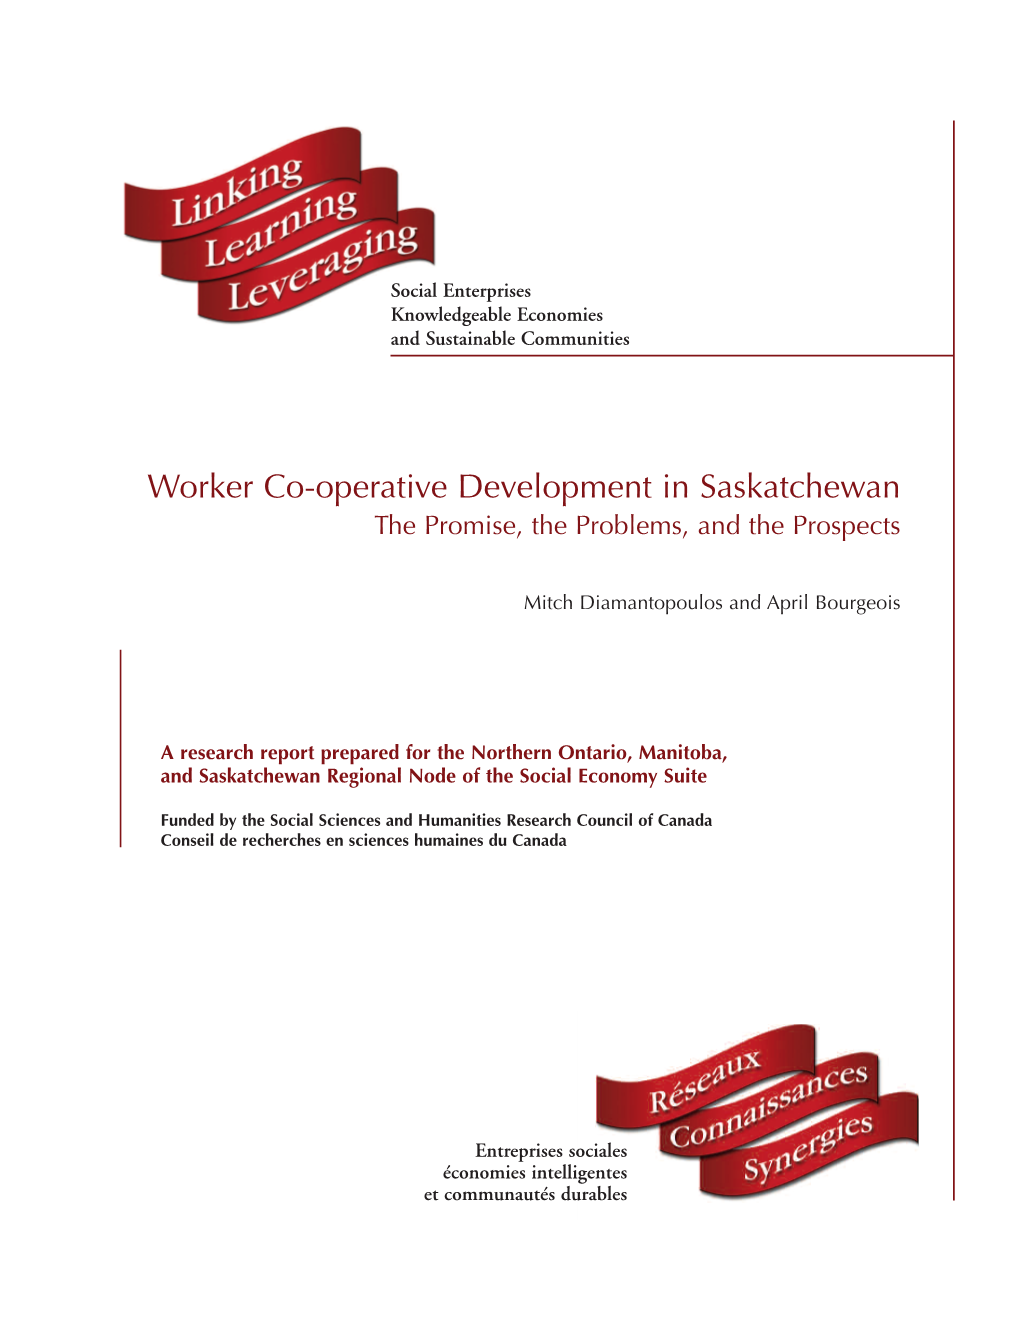 Worker Co-Operative Development in Saskatchewan the Promise, the Problems, and the Prospects